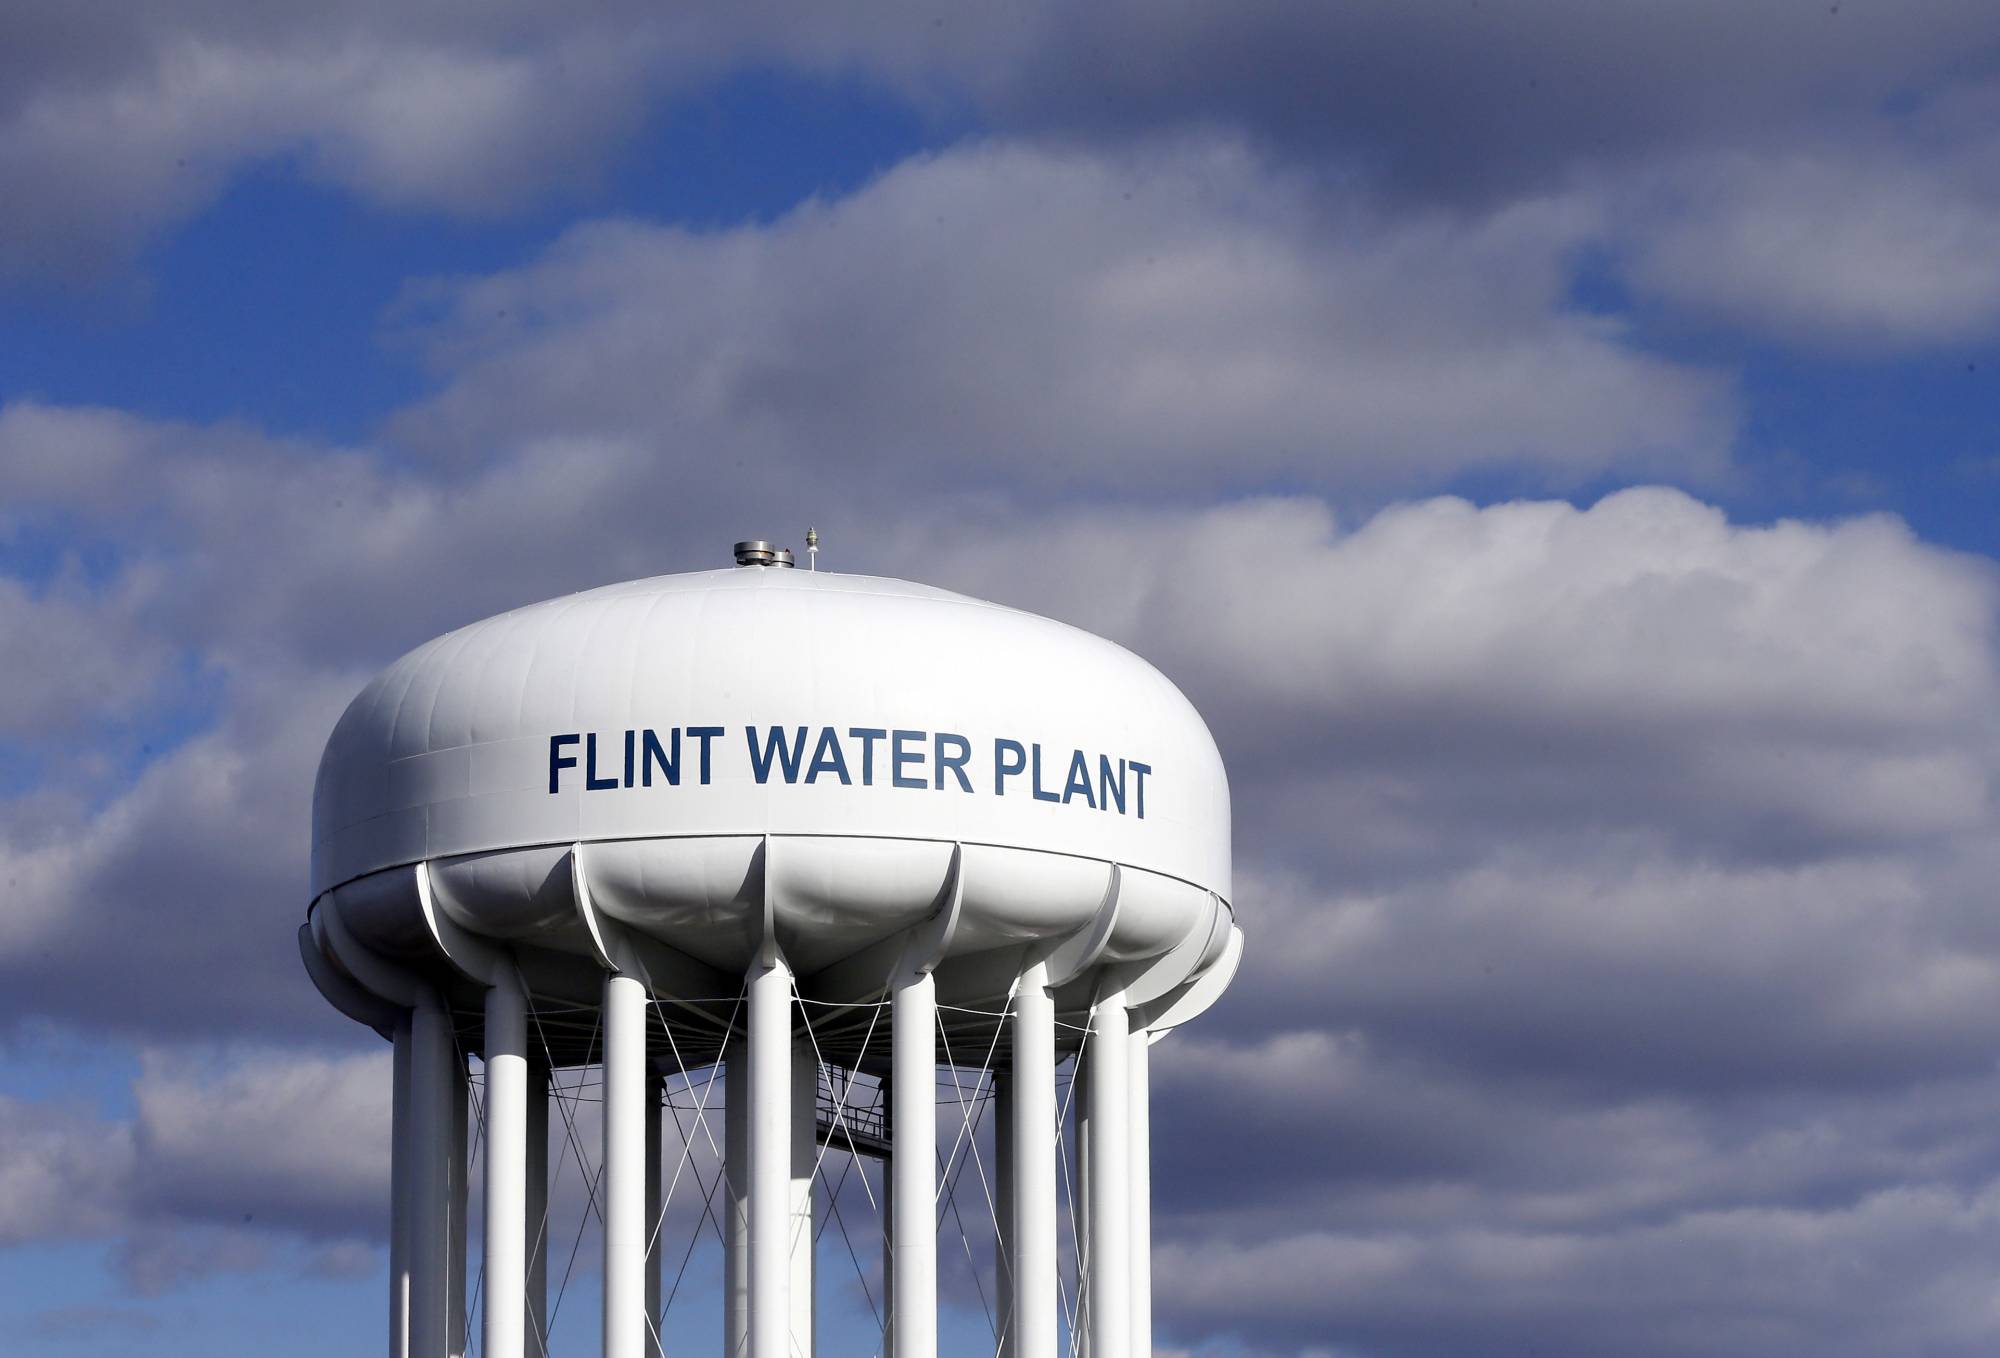 FILE - In this March 21, 2016, file photo, the Flint Water Plant water tower is seen in Flint, Mich. Michigan Gov. Gretchen Whitmer says a proposed $600 million deal between the state of Michigan and Flint residents harmed by lead-tainted water is a step toward making amends. Officials announced the settlement Thursday, Aug. 20, 2020, which must be approved by a federal judge.  (AP Photo/Carlos Osorio, File)